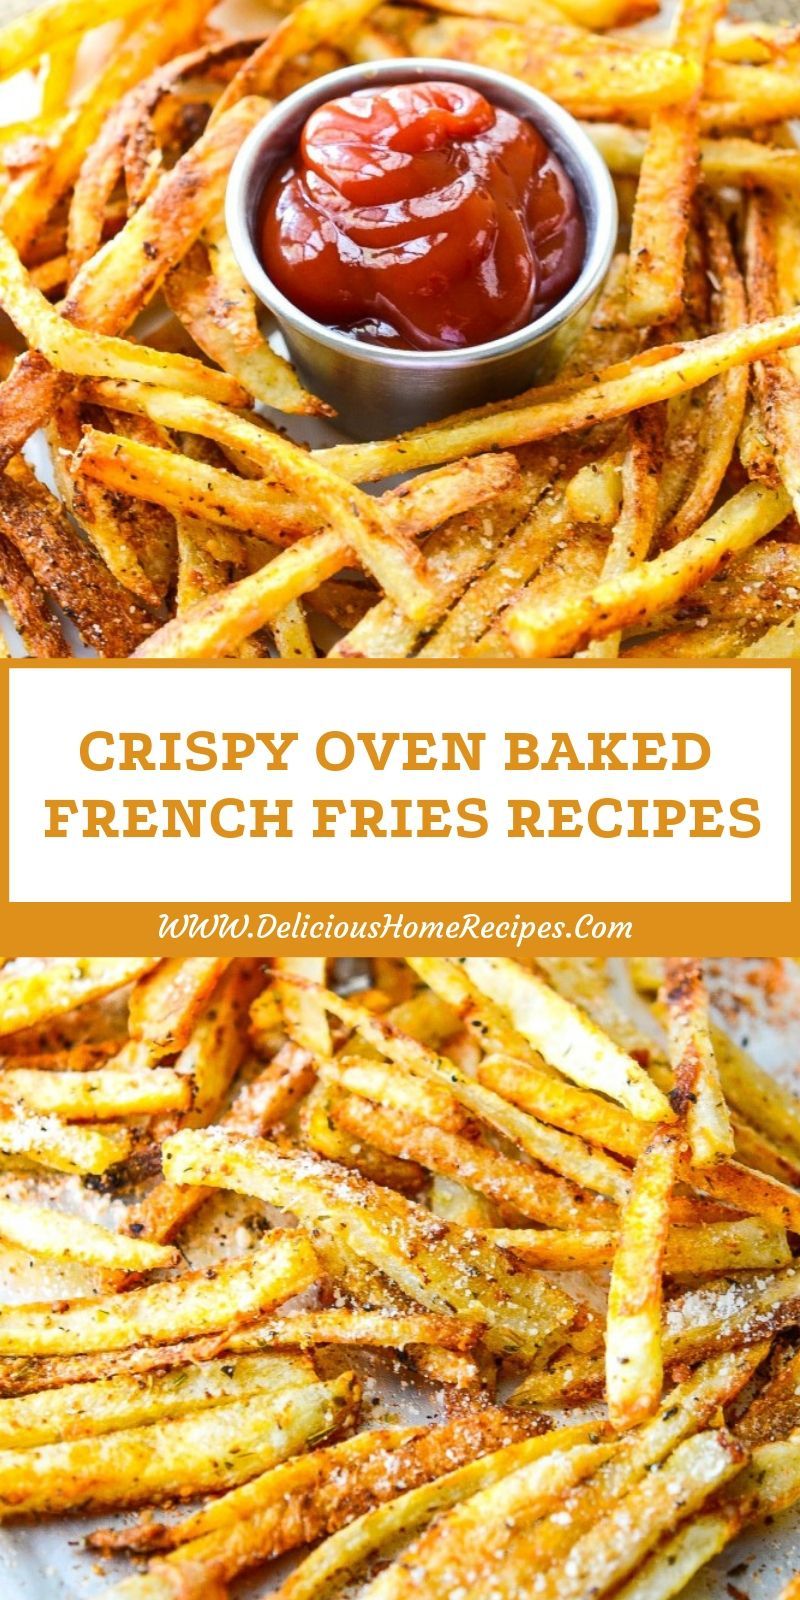 Crispy Oven Baked French Fries Recipes -   7 healthy recipes Vegetables french fries ideas